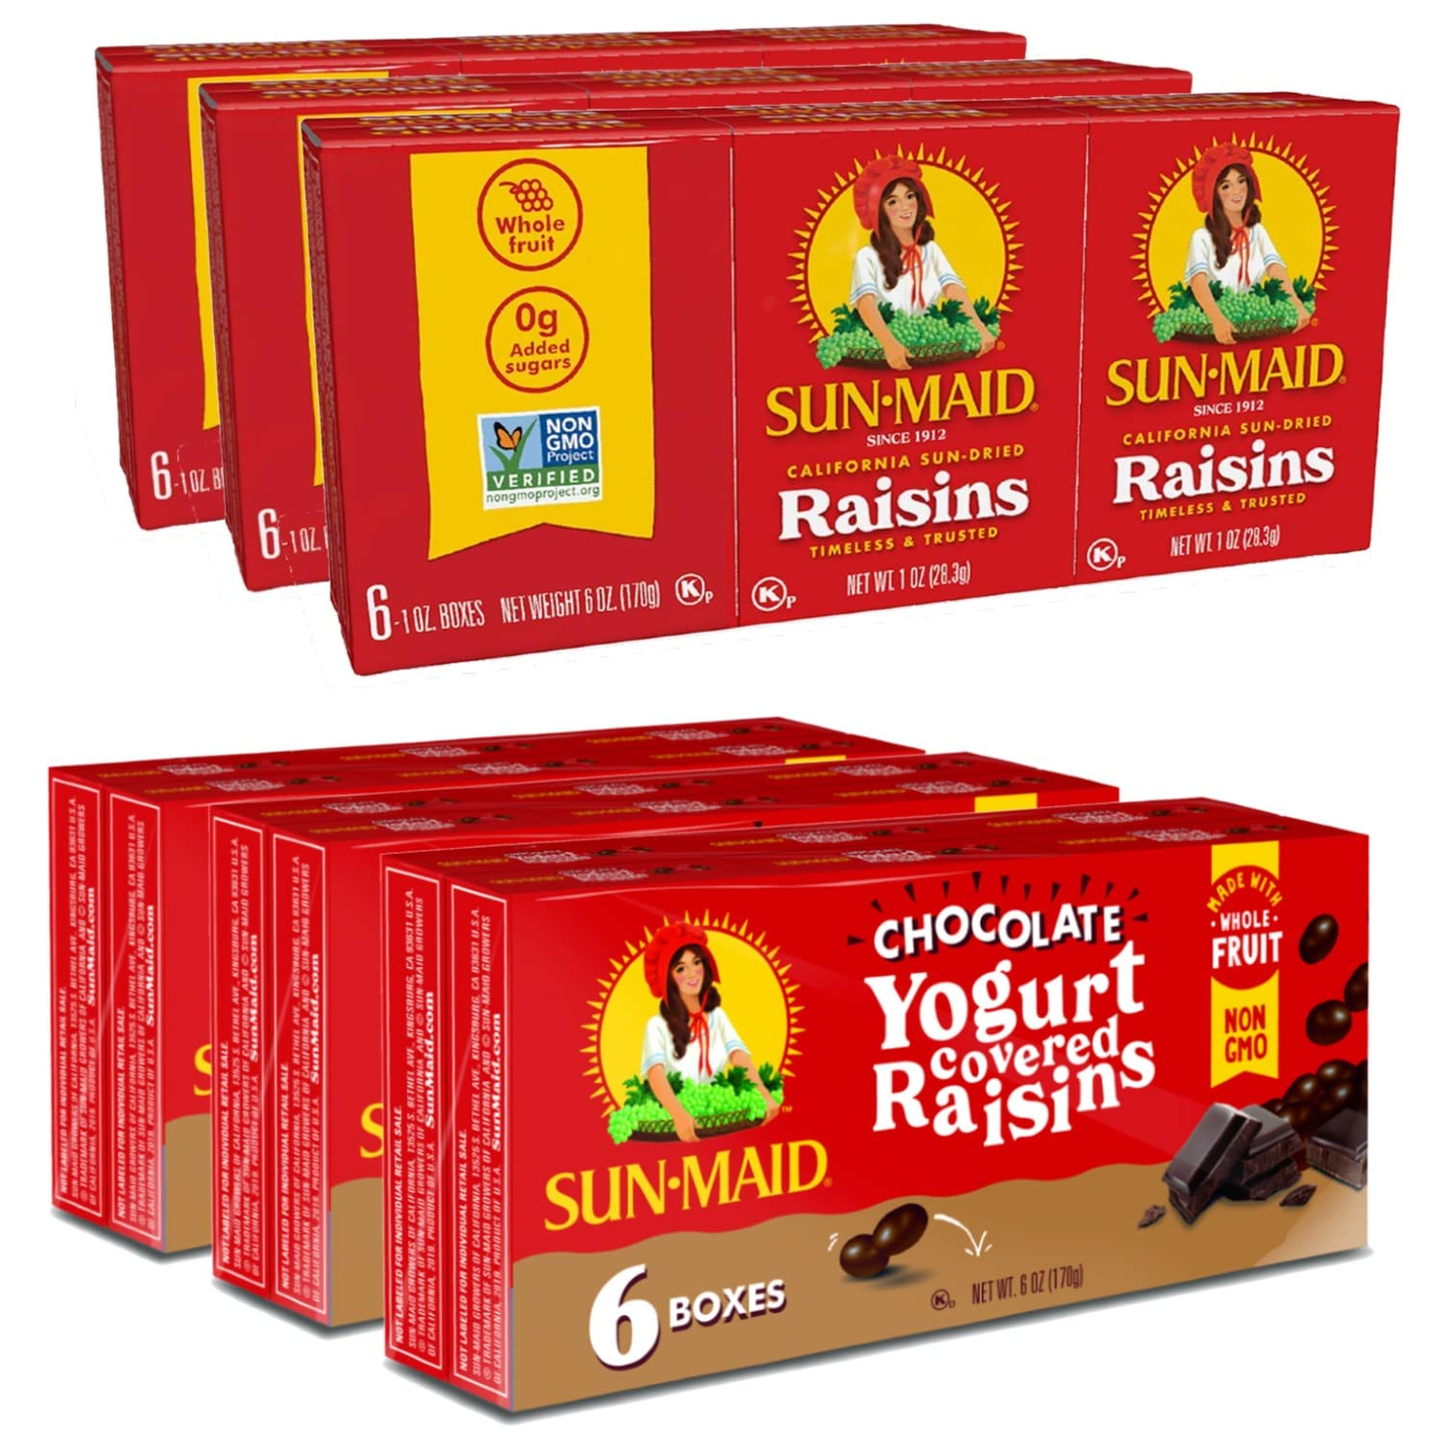 Sun-Maid California Raisin and Chocolate Yogurt Covered Raisin Variety Pack | 1 Ounce Boxes | 6 Count | Pack of 6 |Whole Dried Fruit Snacks| No Artificial Flavors | Non-Gmo